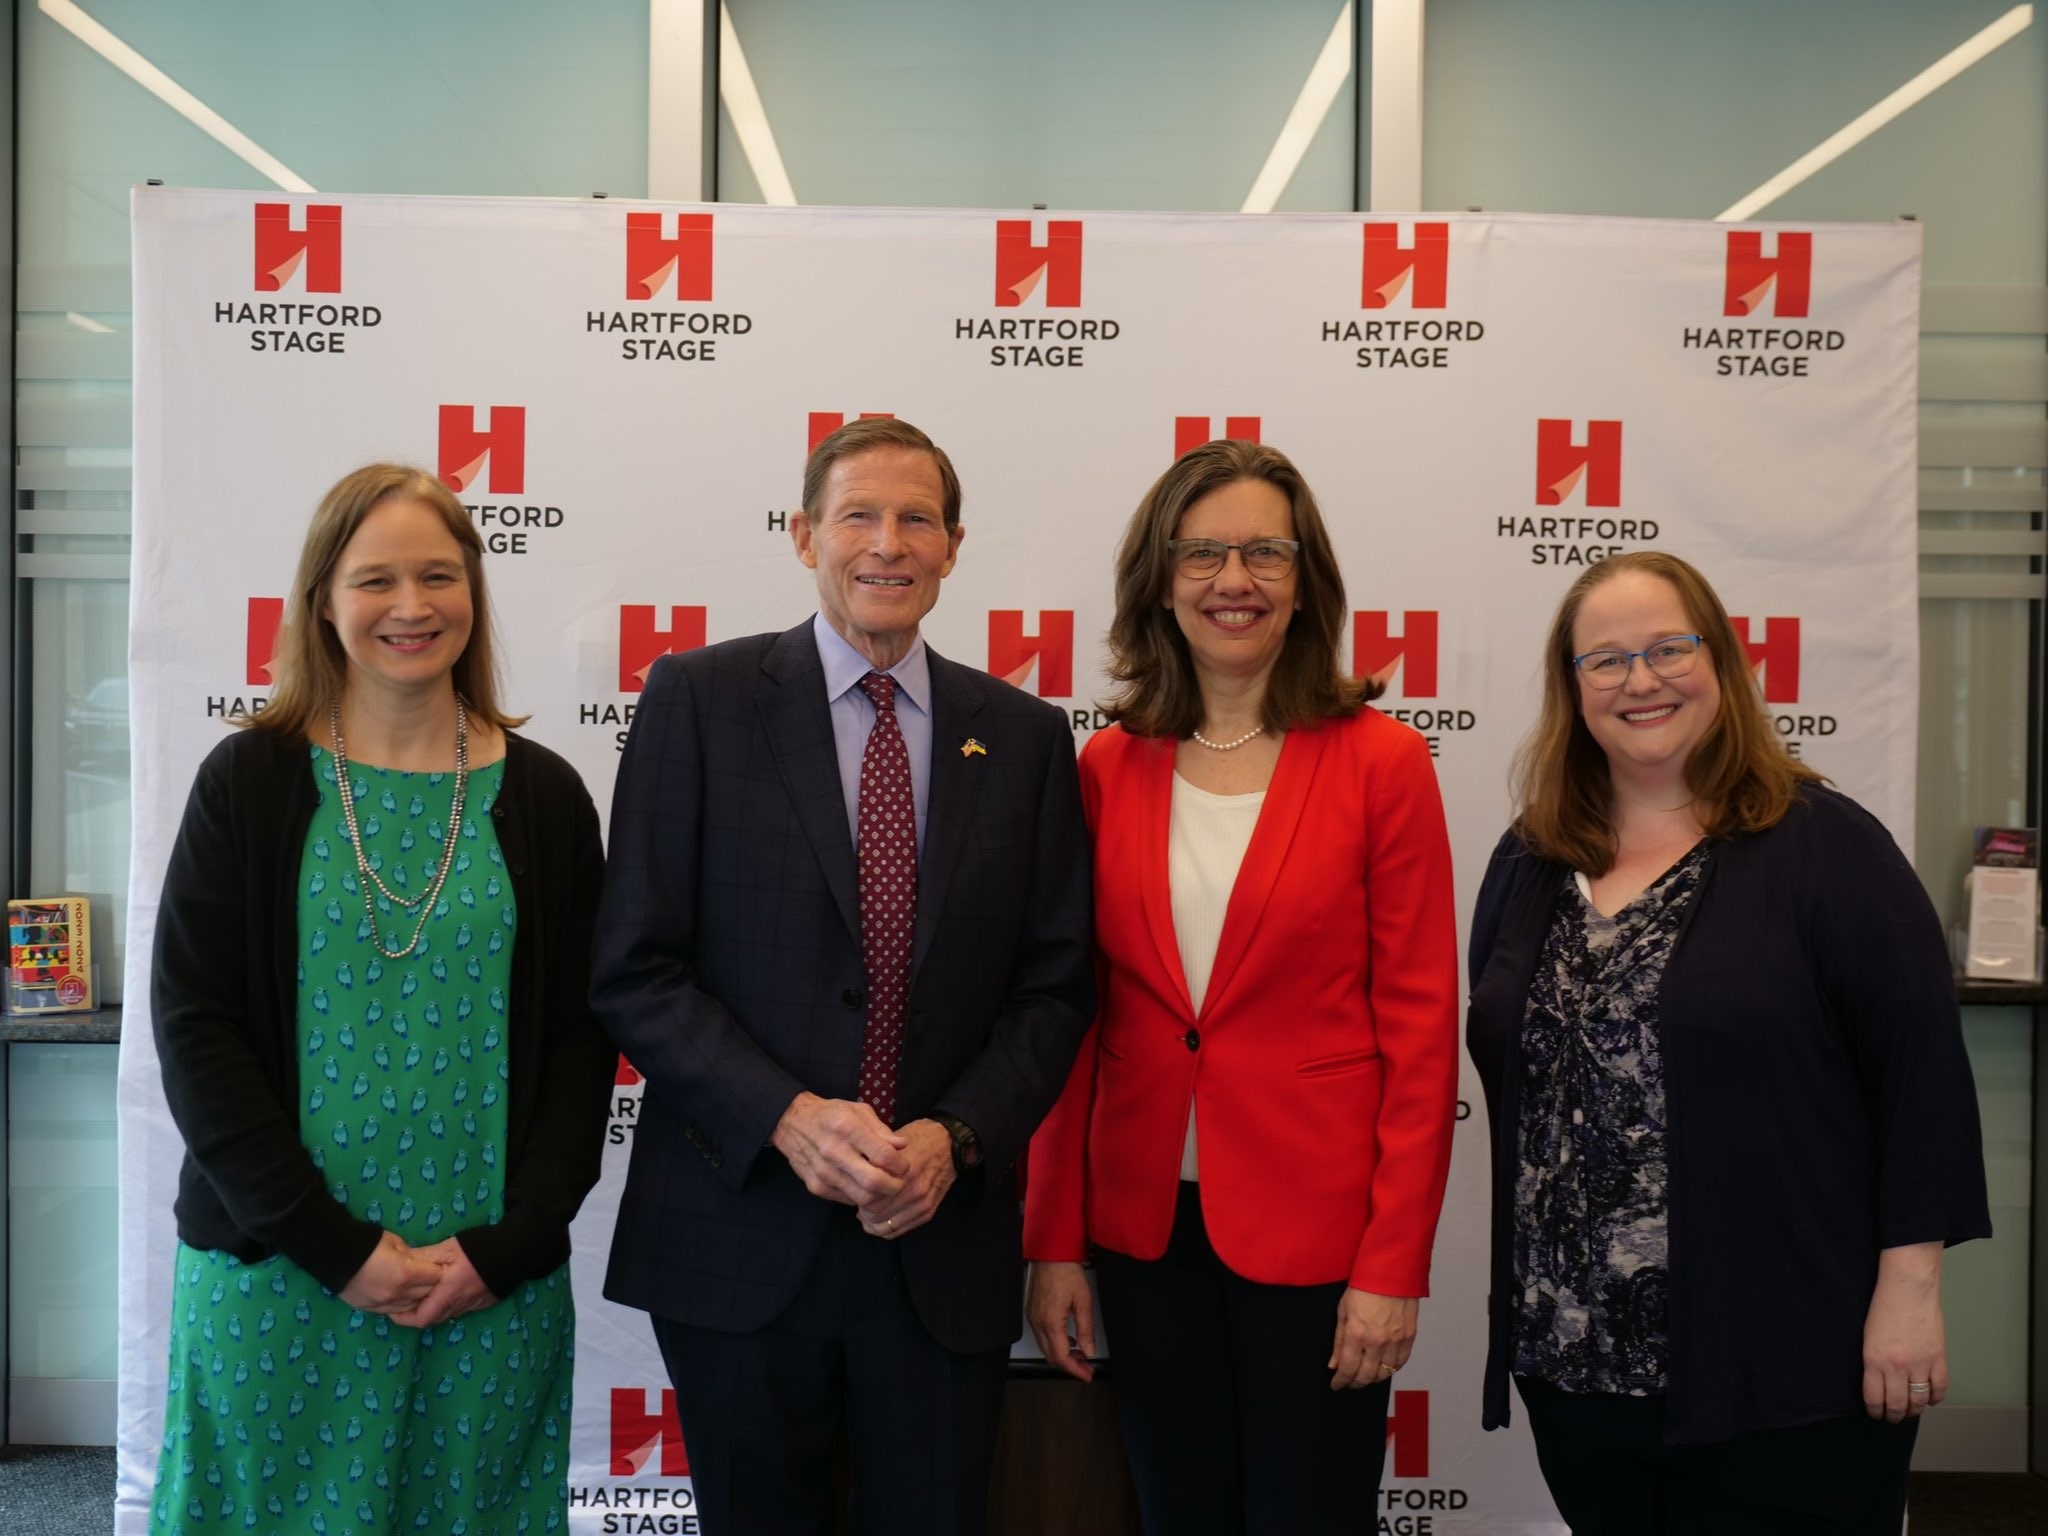 Blumenthal announced $100,000 to support the Hartford Stage summer arts education programs. 